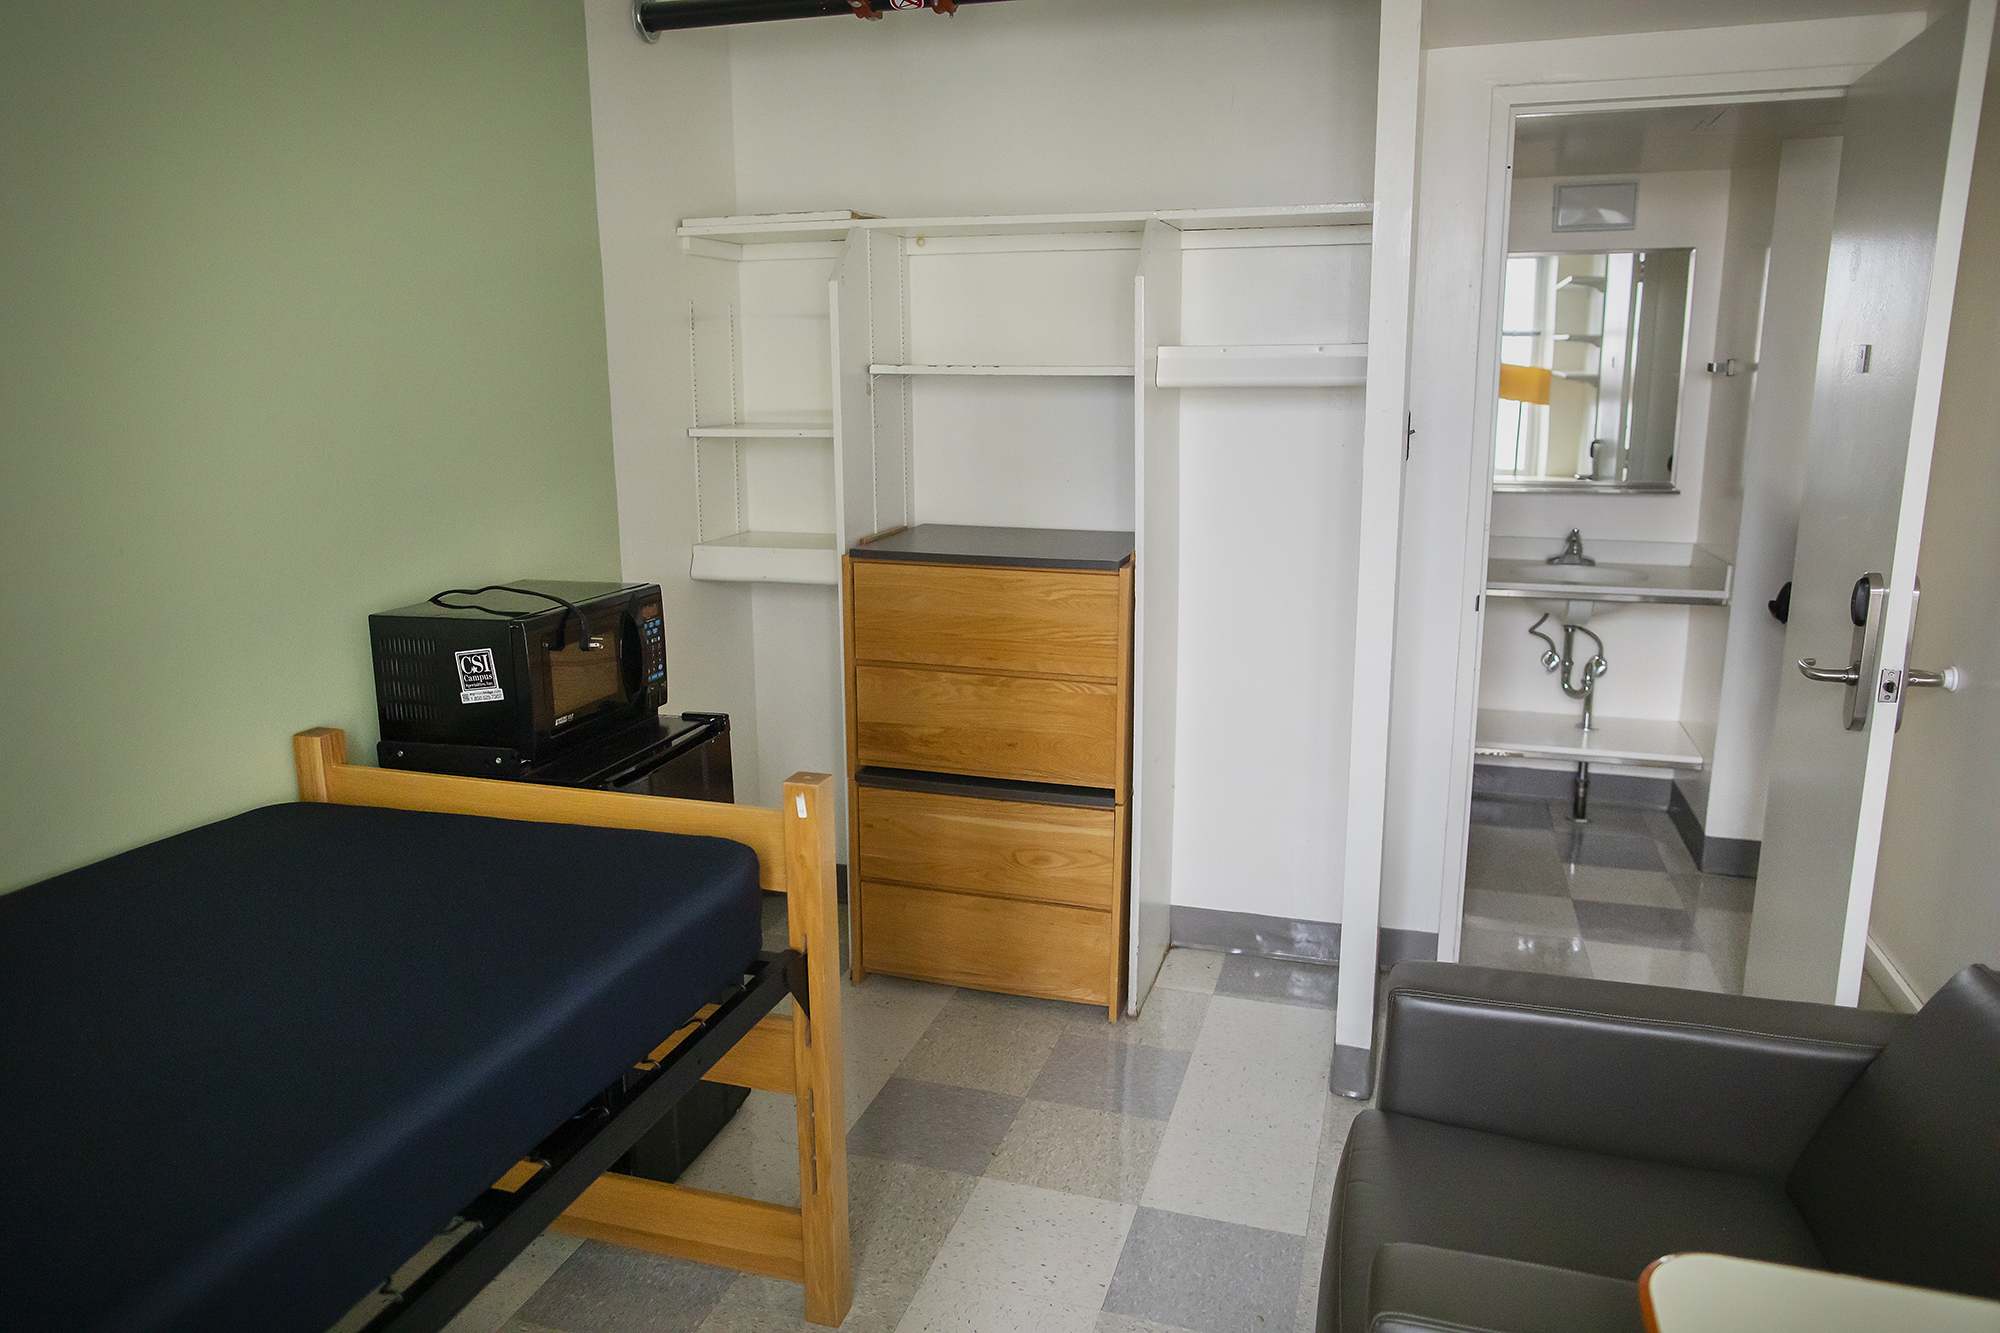 a dorm room with a bed, micro-fridge, dresser, chair